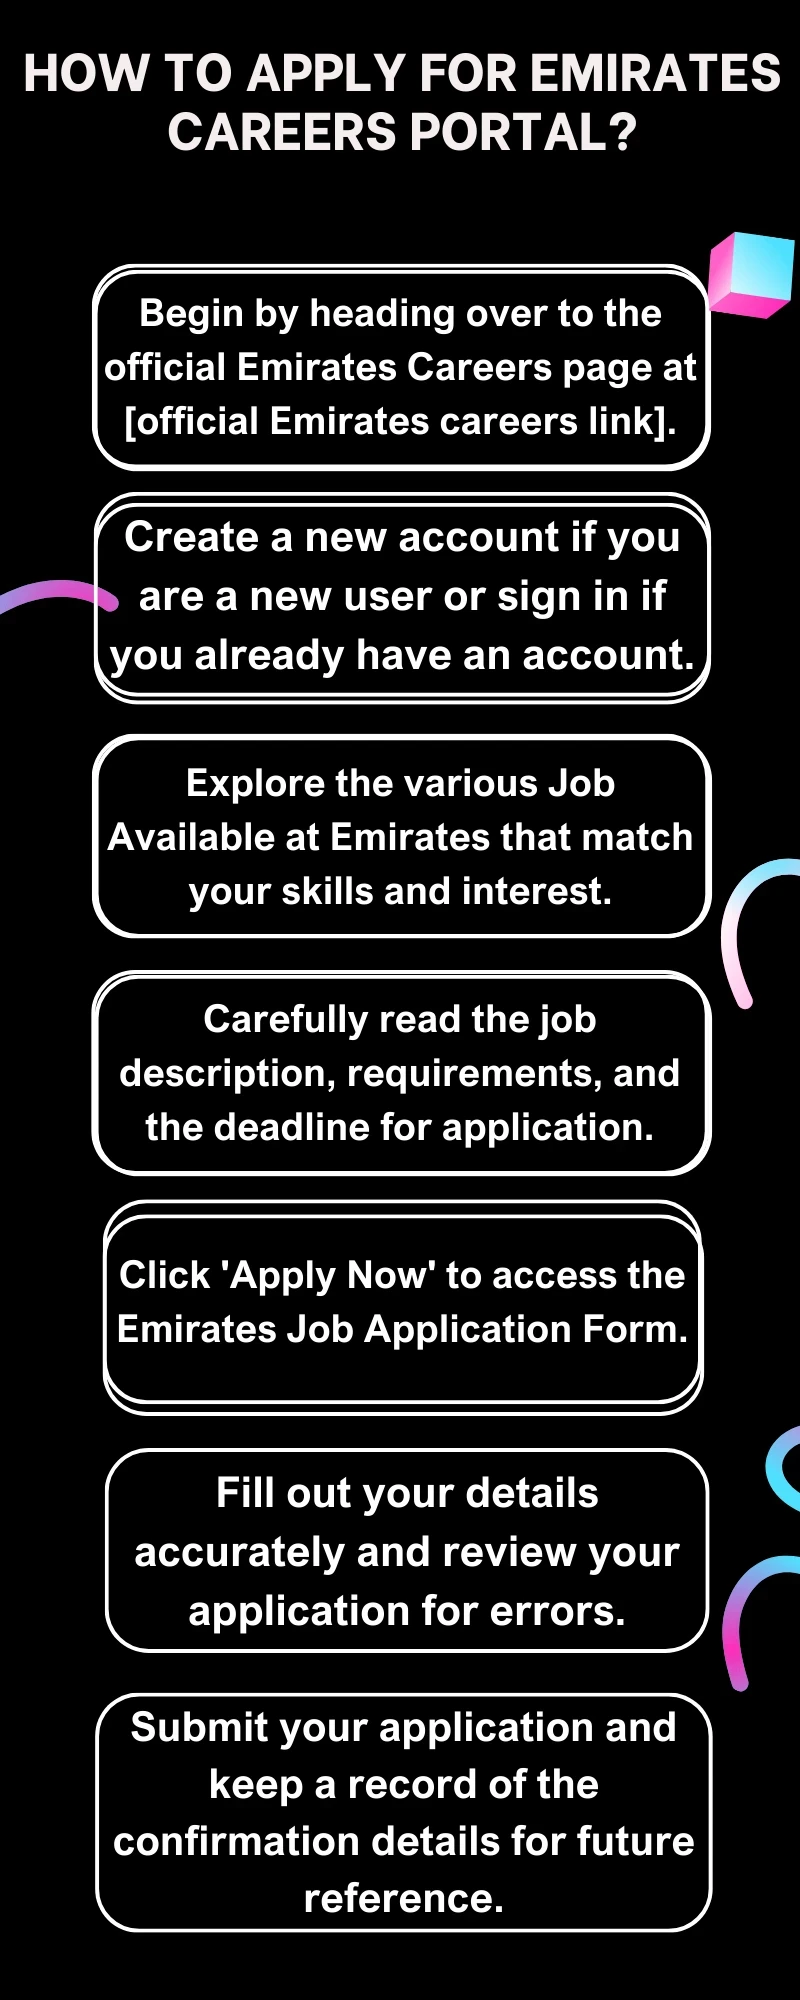 How To Apply for DHL Careers Portal Online?